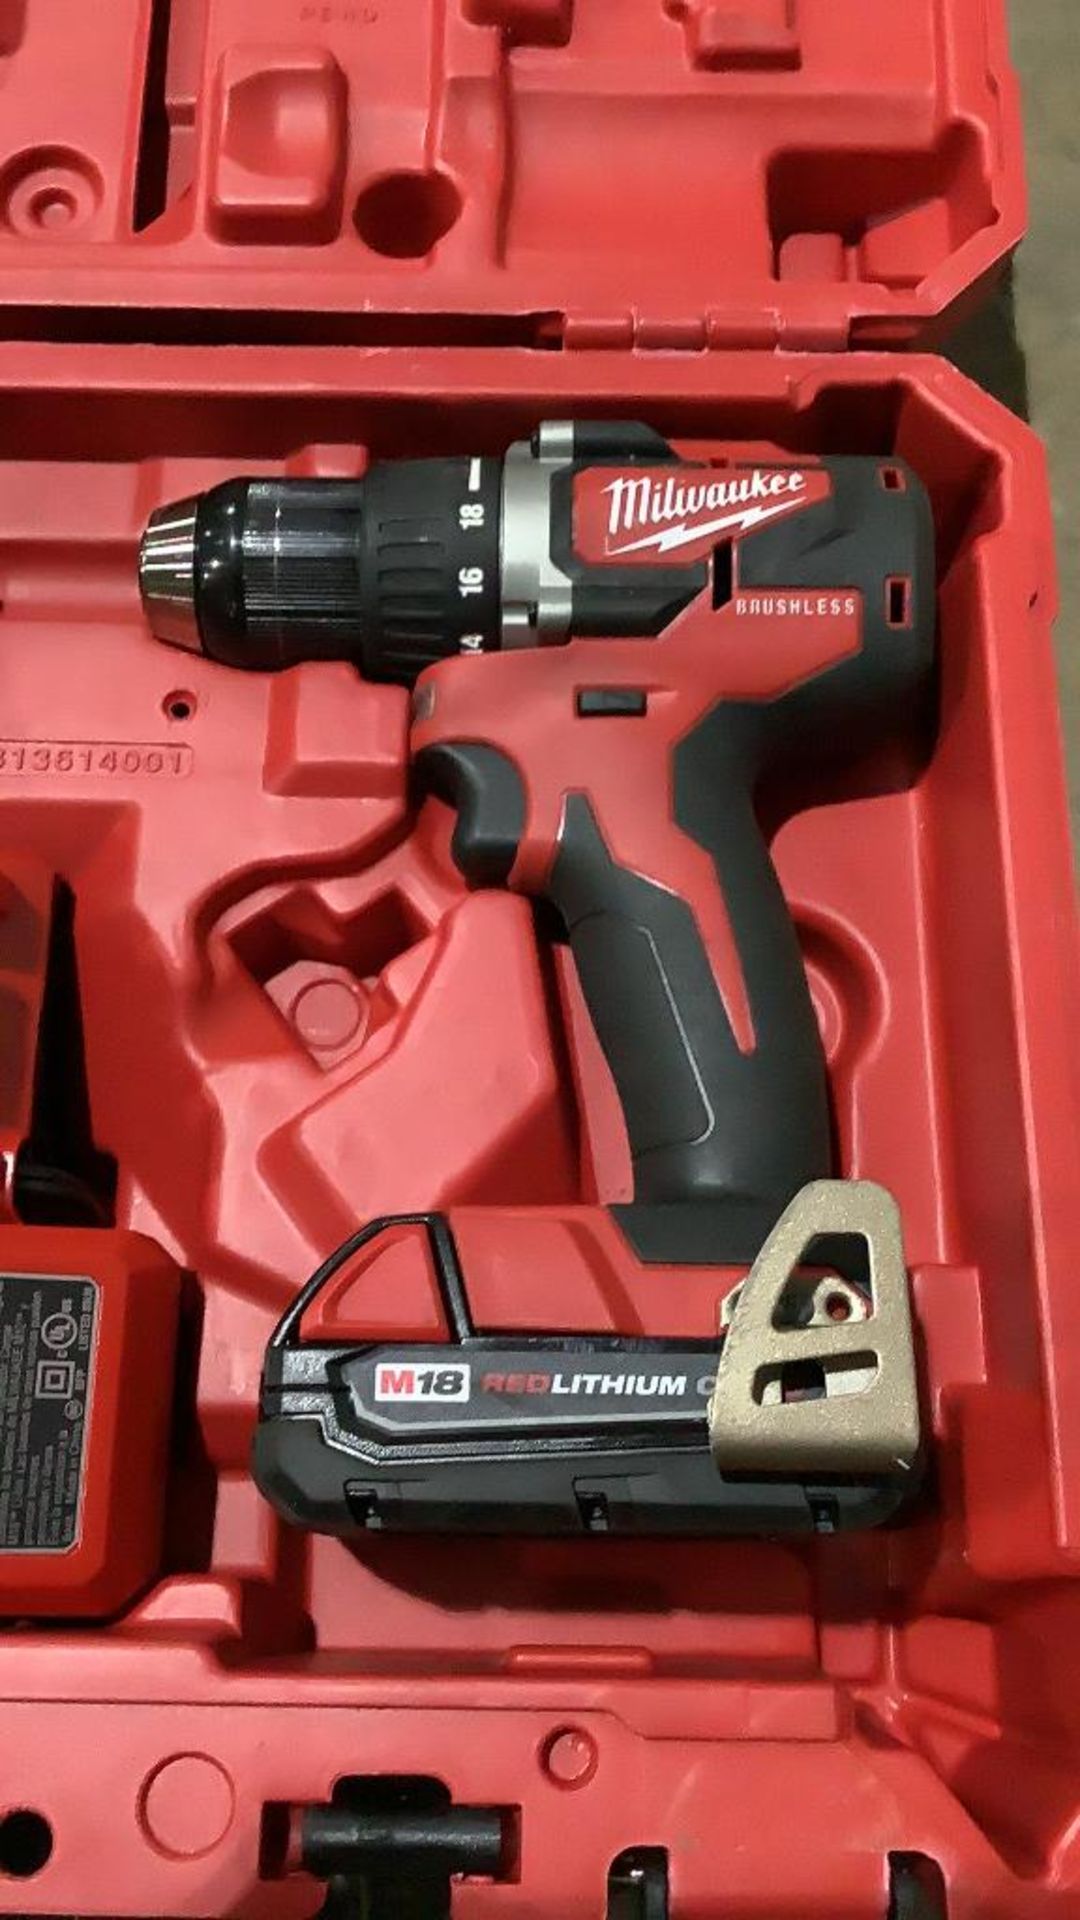 Milwaukee Cordless 1/2" Drill/Driver - Image 9 of 10